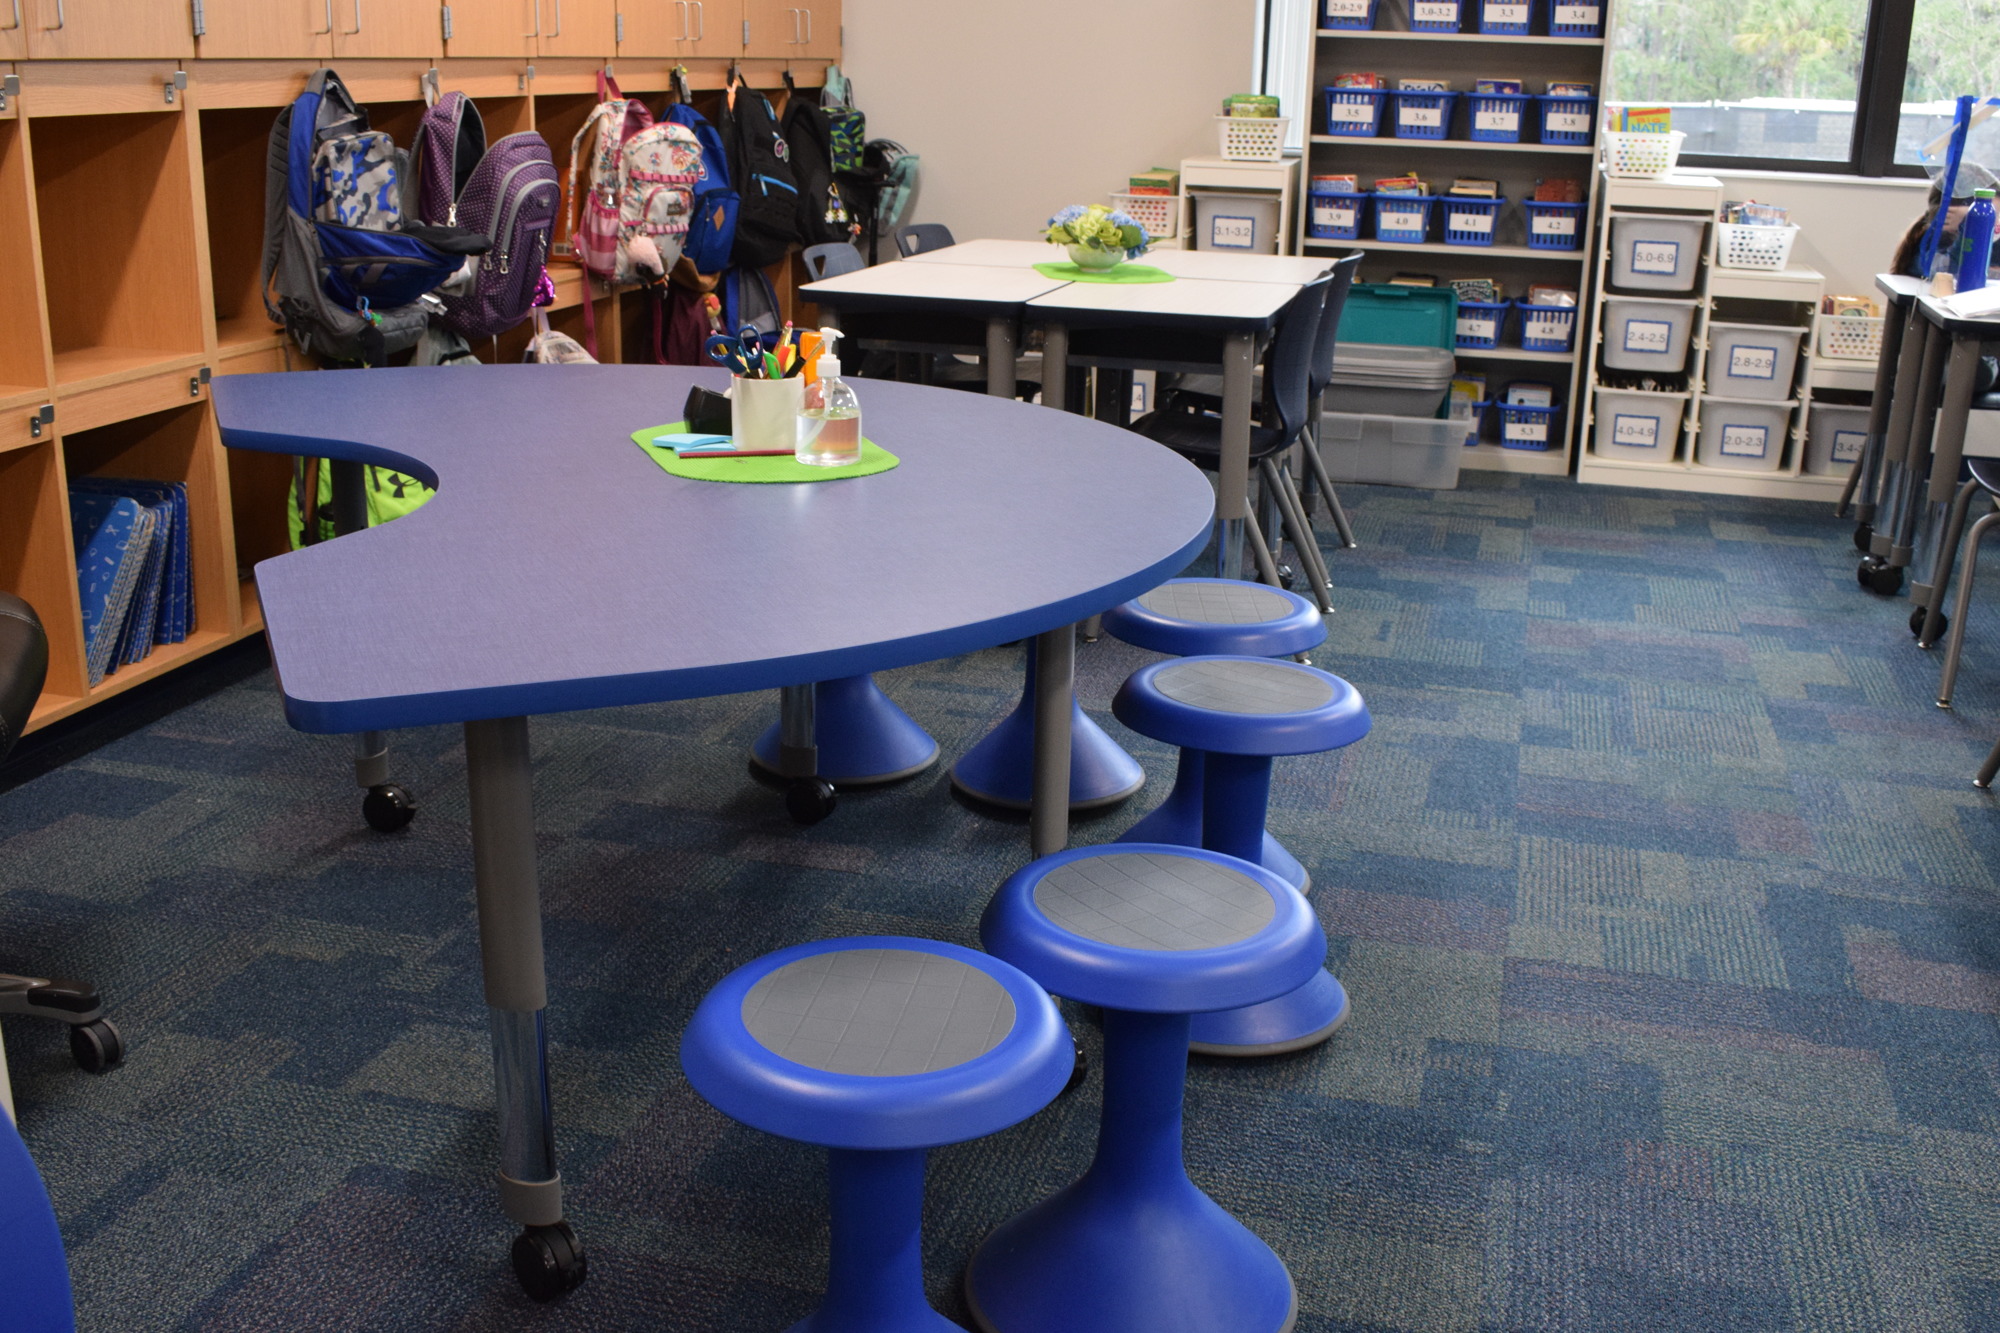 Students love to sit on the new wiggly stools in the additions.